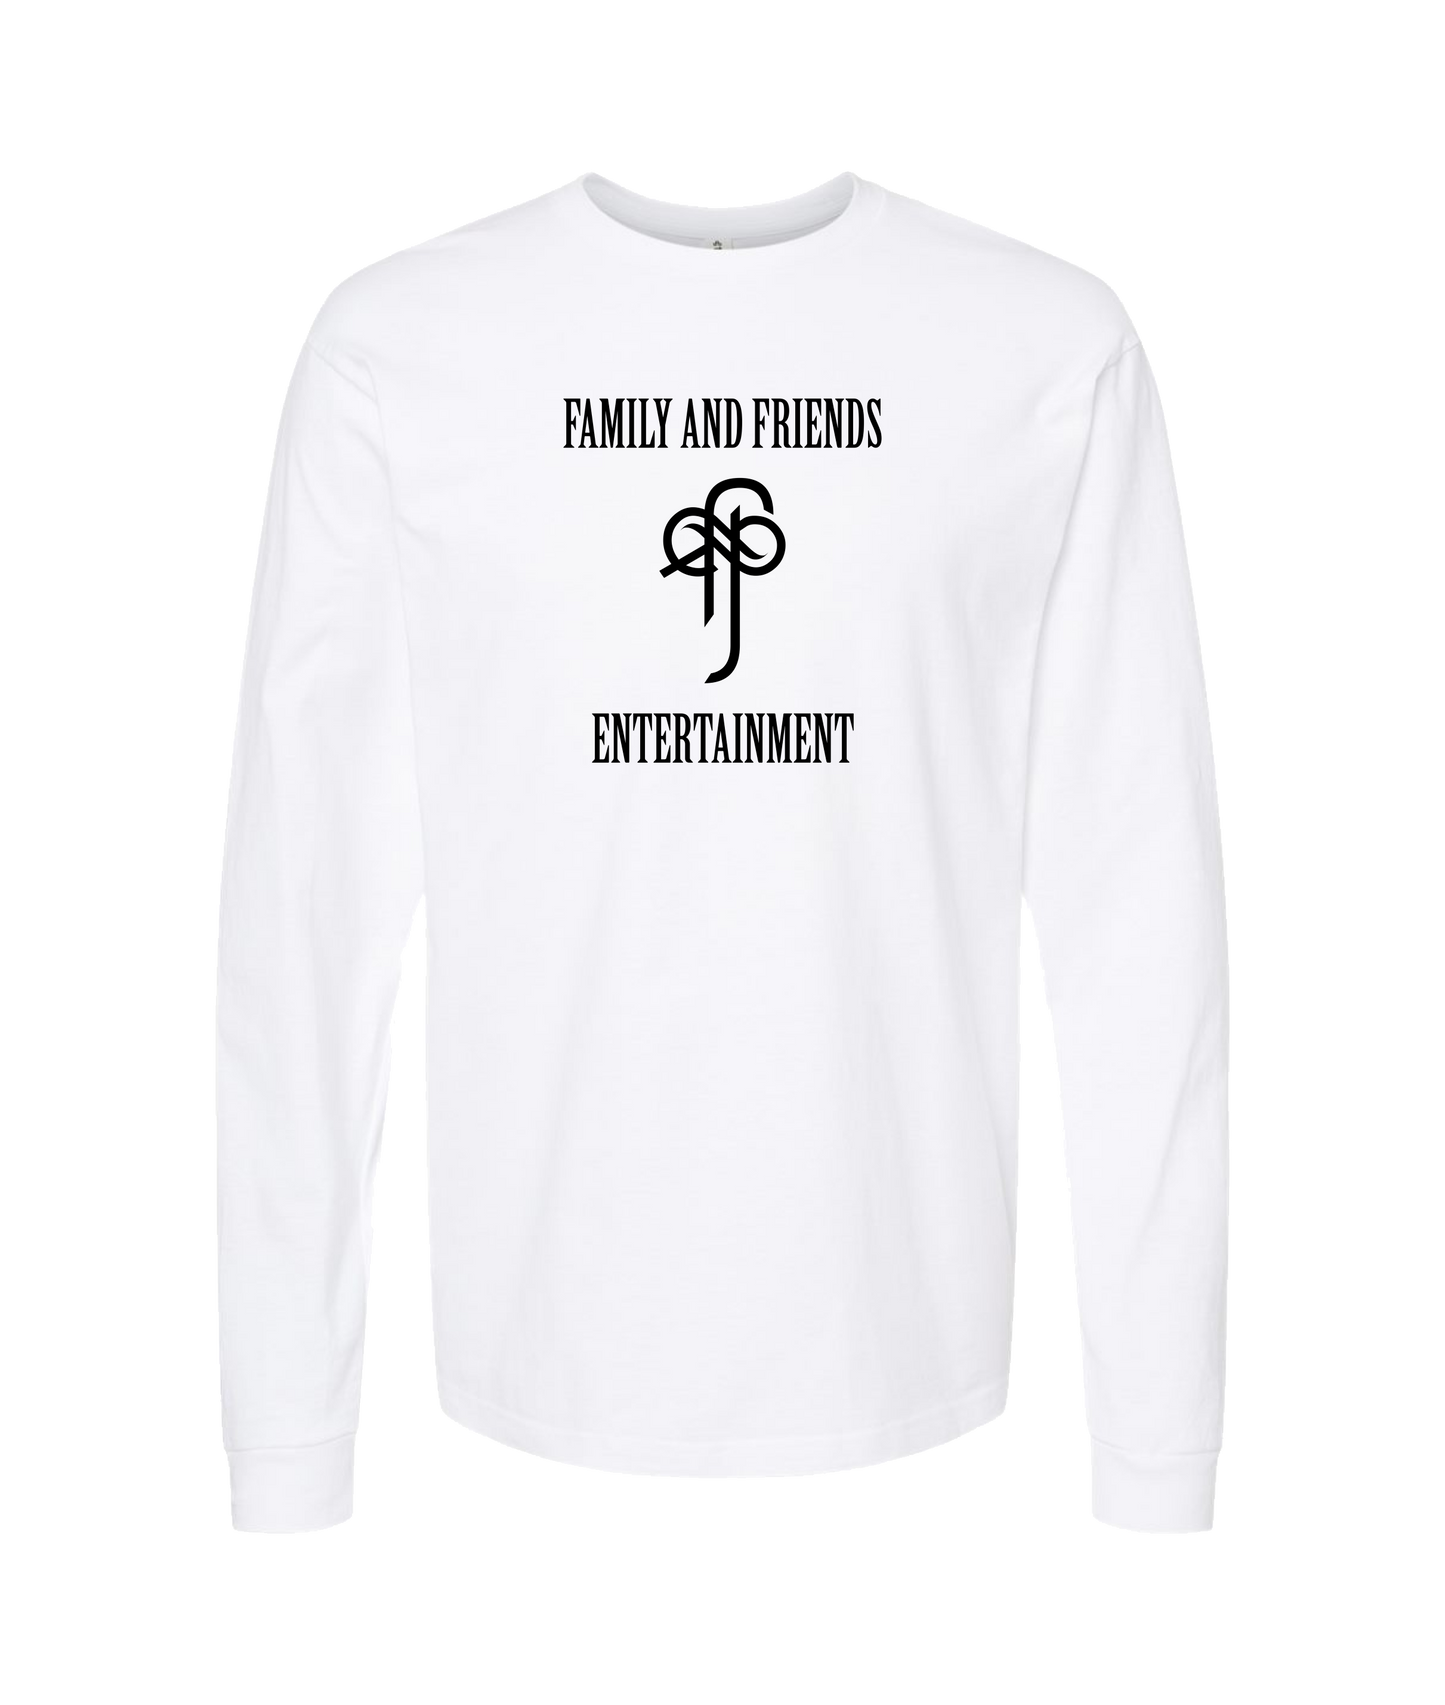 Sincrawford - Family and Friends Ent.  - White Long Sleeve T